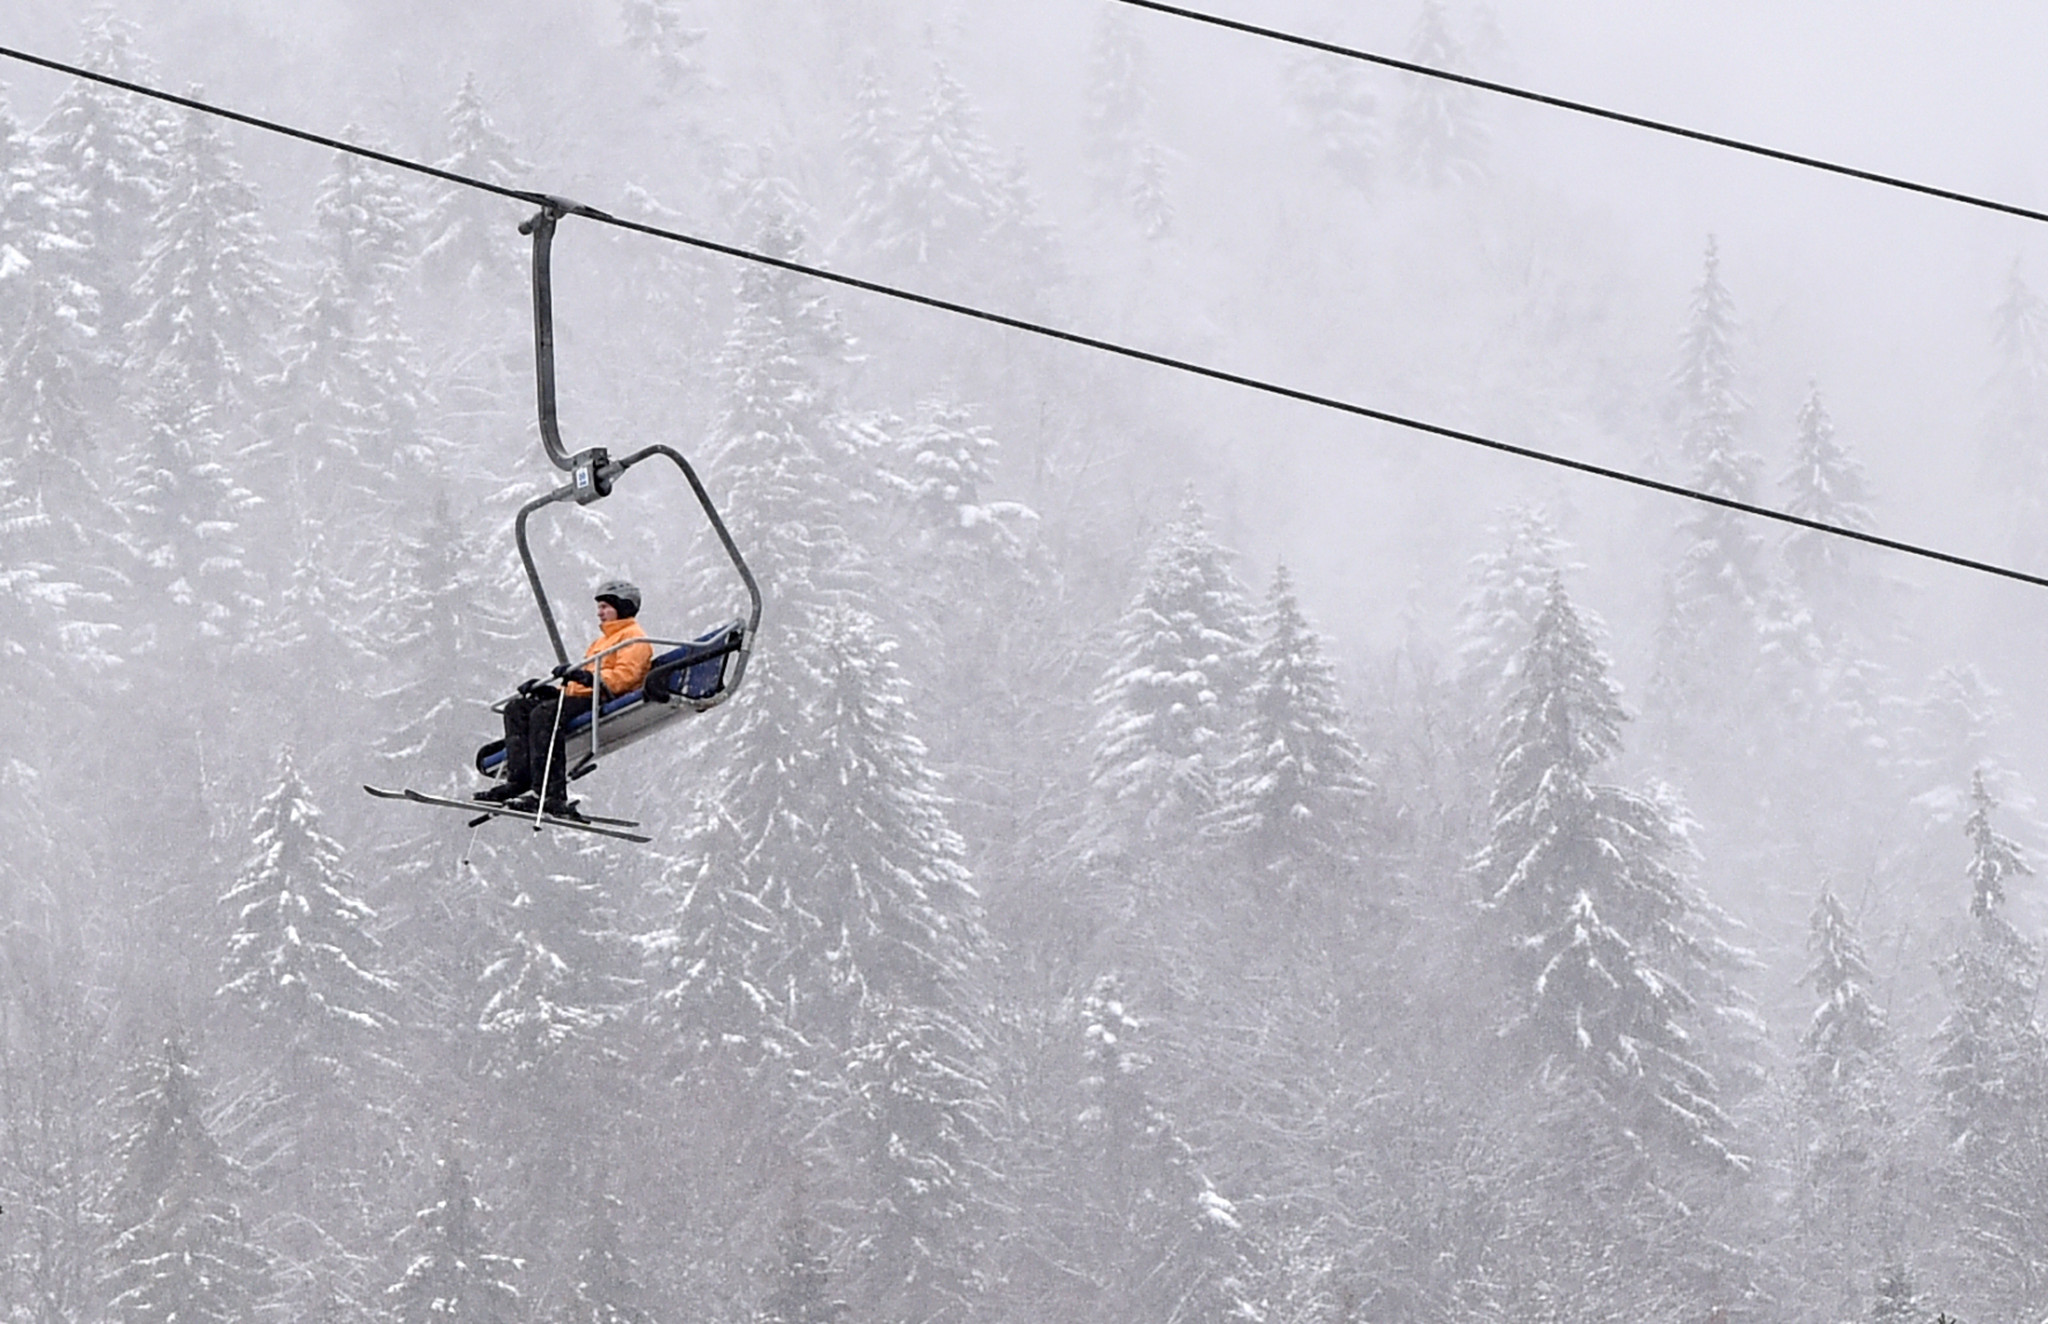 Ukraine's largest ski resort, Bukovel, would likely feature in a Winter Olympic bid ©Getty Images